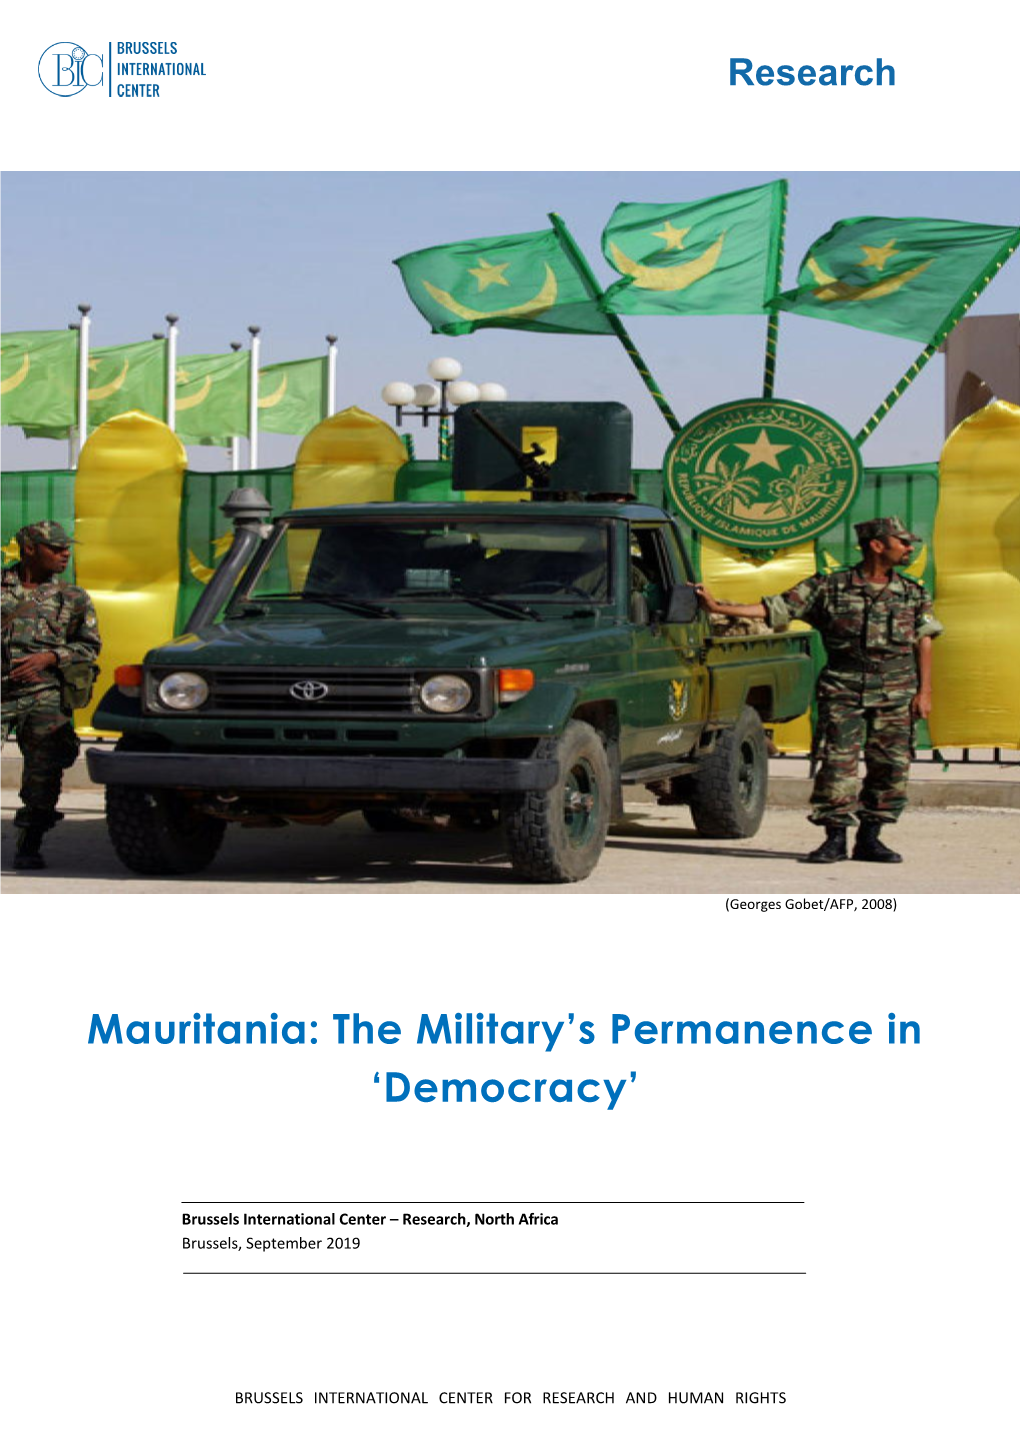 Mauritania: the Military's Permanence in 'Democracy'